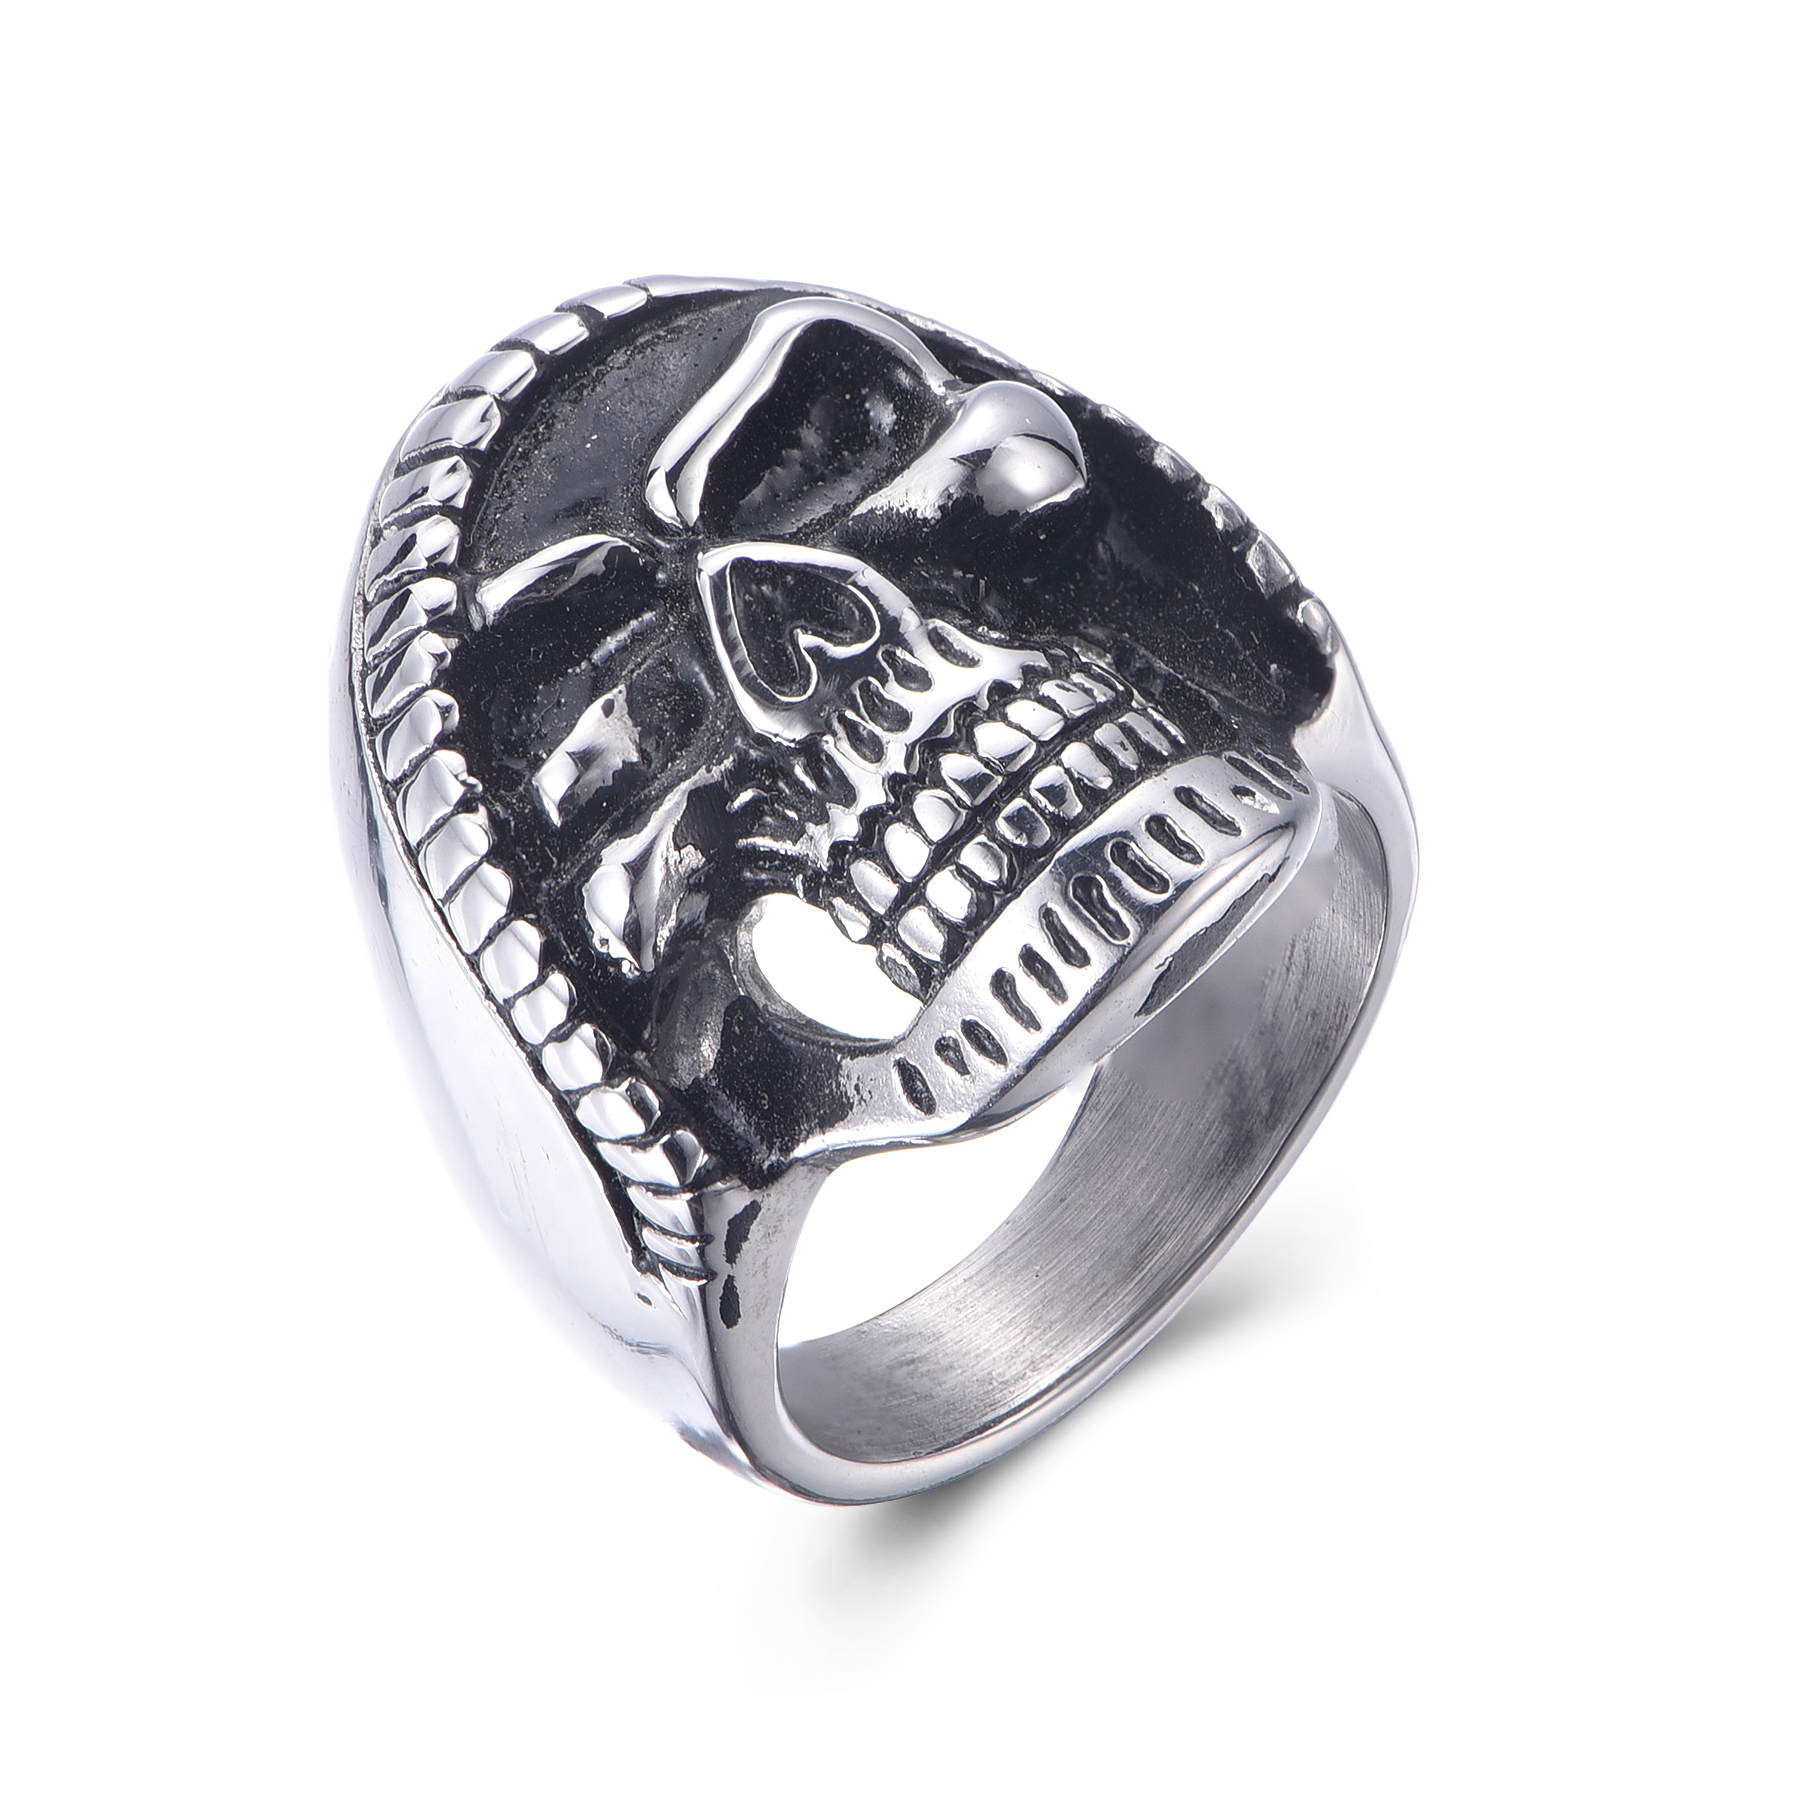 New Designed Stainless Steel Casting Hip Hop Skull Men's Ring Jewelry RS10-03